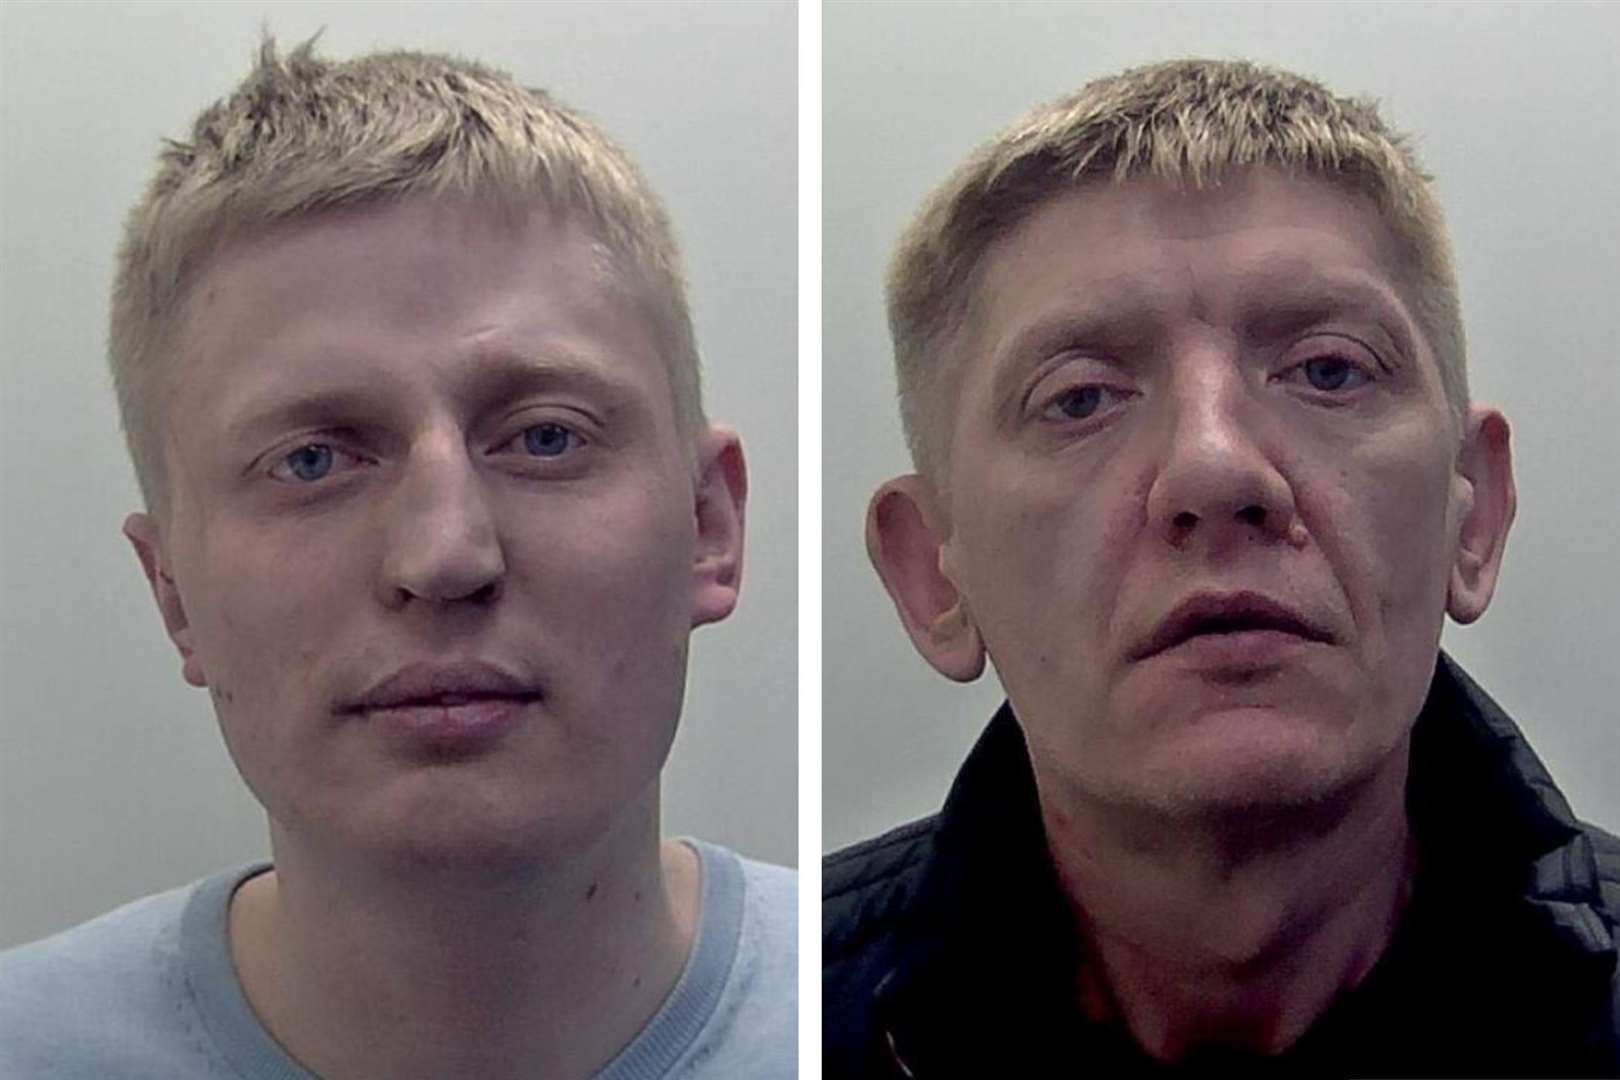 Nikas Biliakevicius, from Hull, and Andrius Petrauskas, from Eltham in London, were locked up last month. Picture: Kent Police